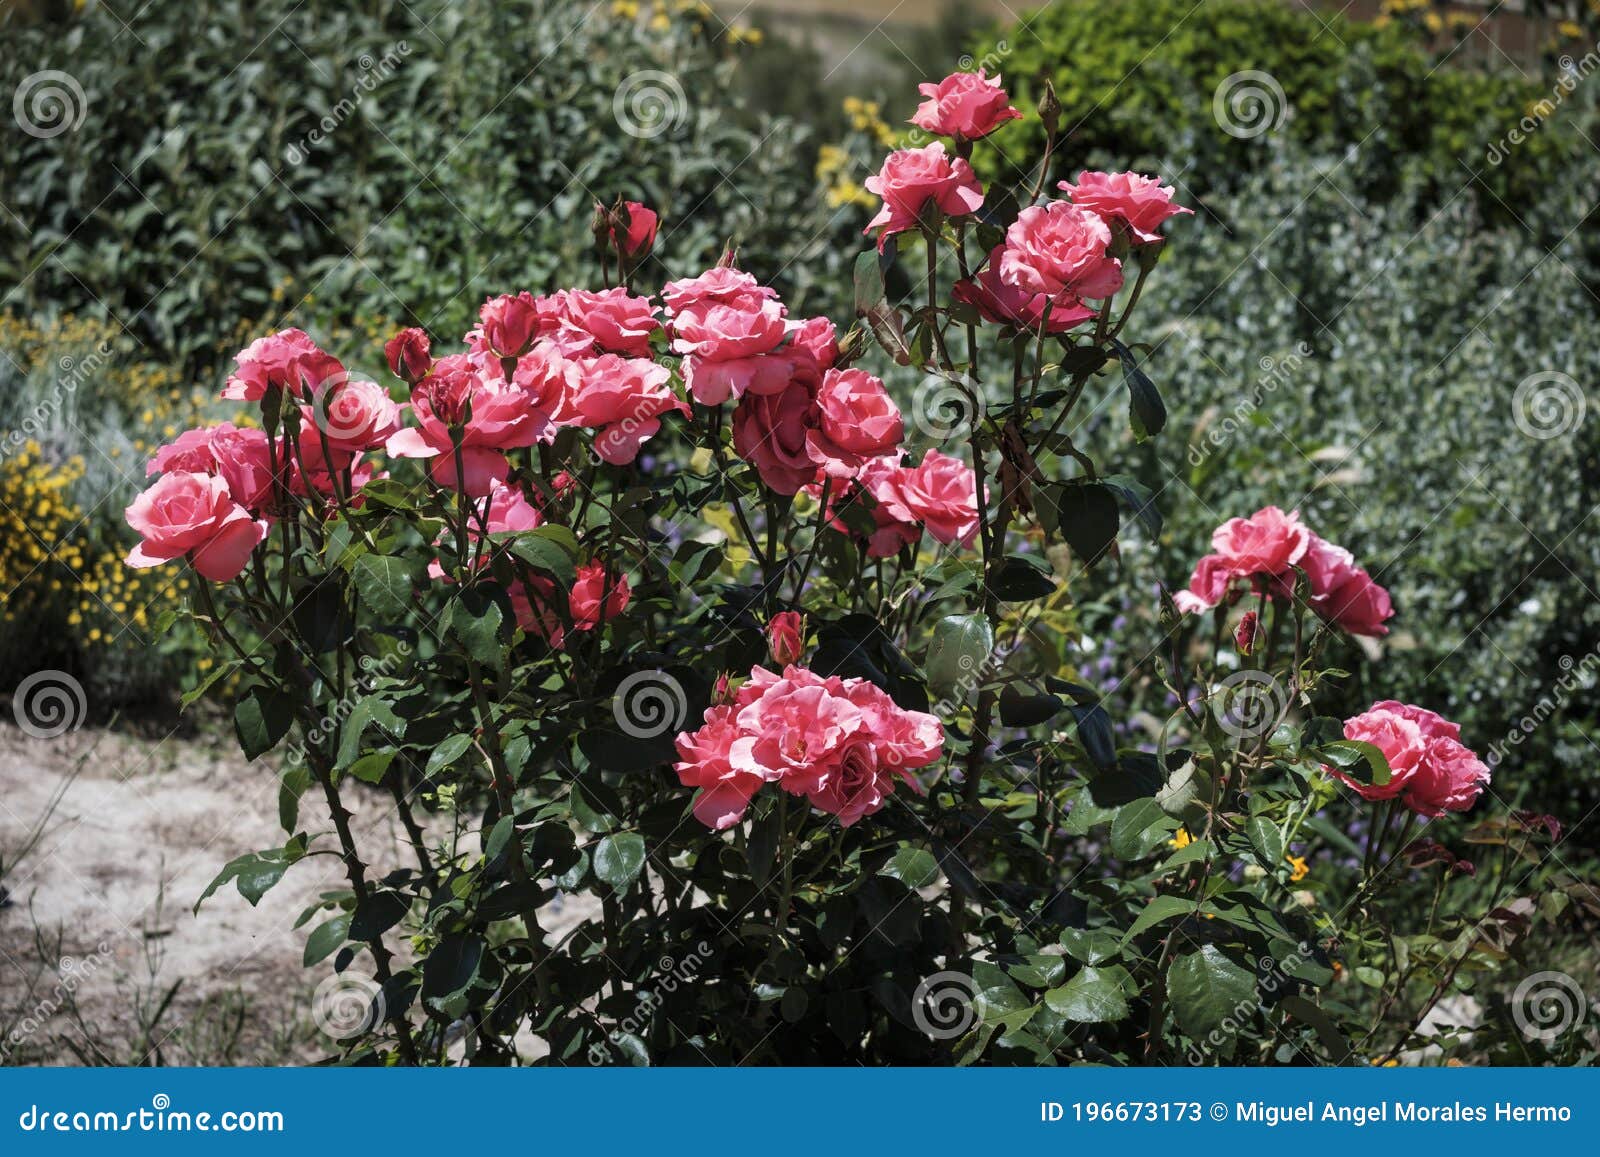 wild roses in the middle of a cultivated field